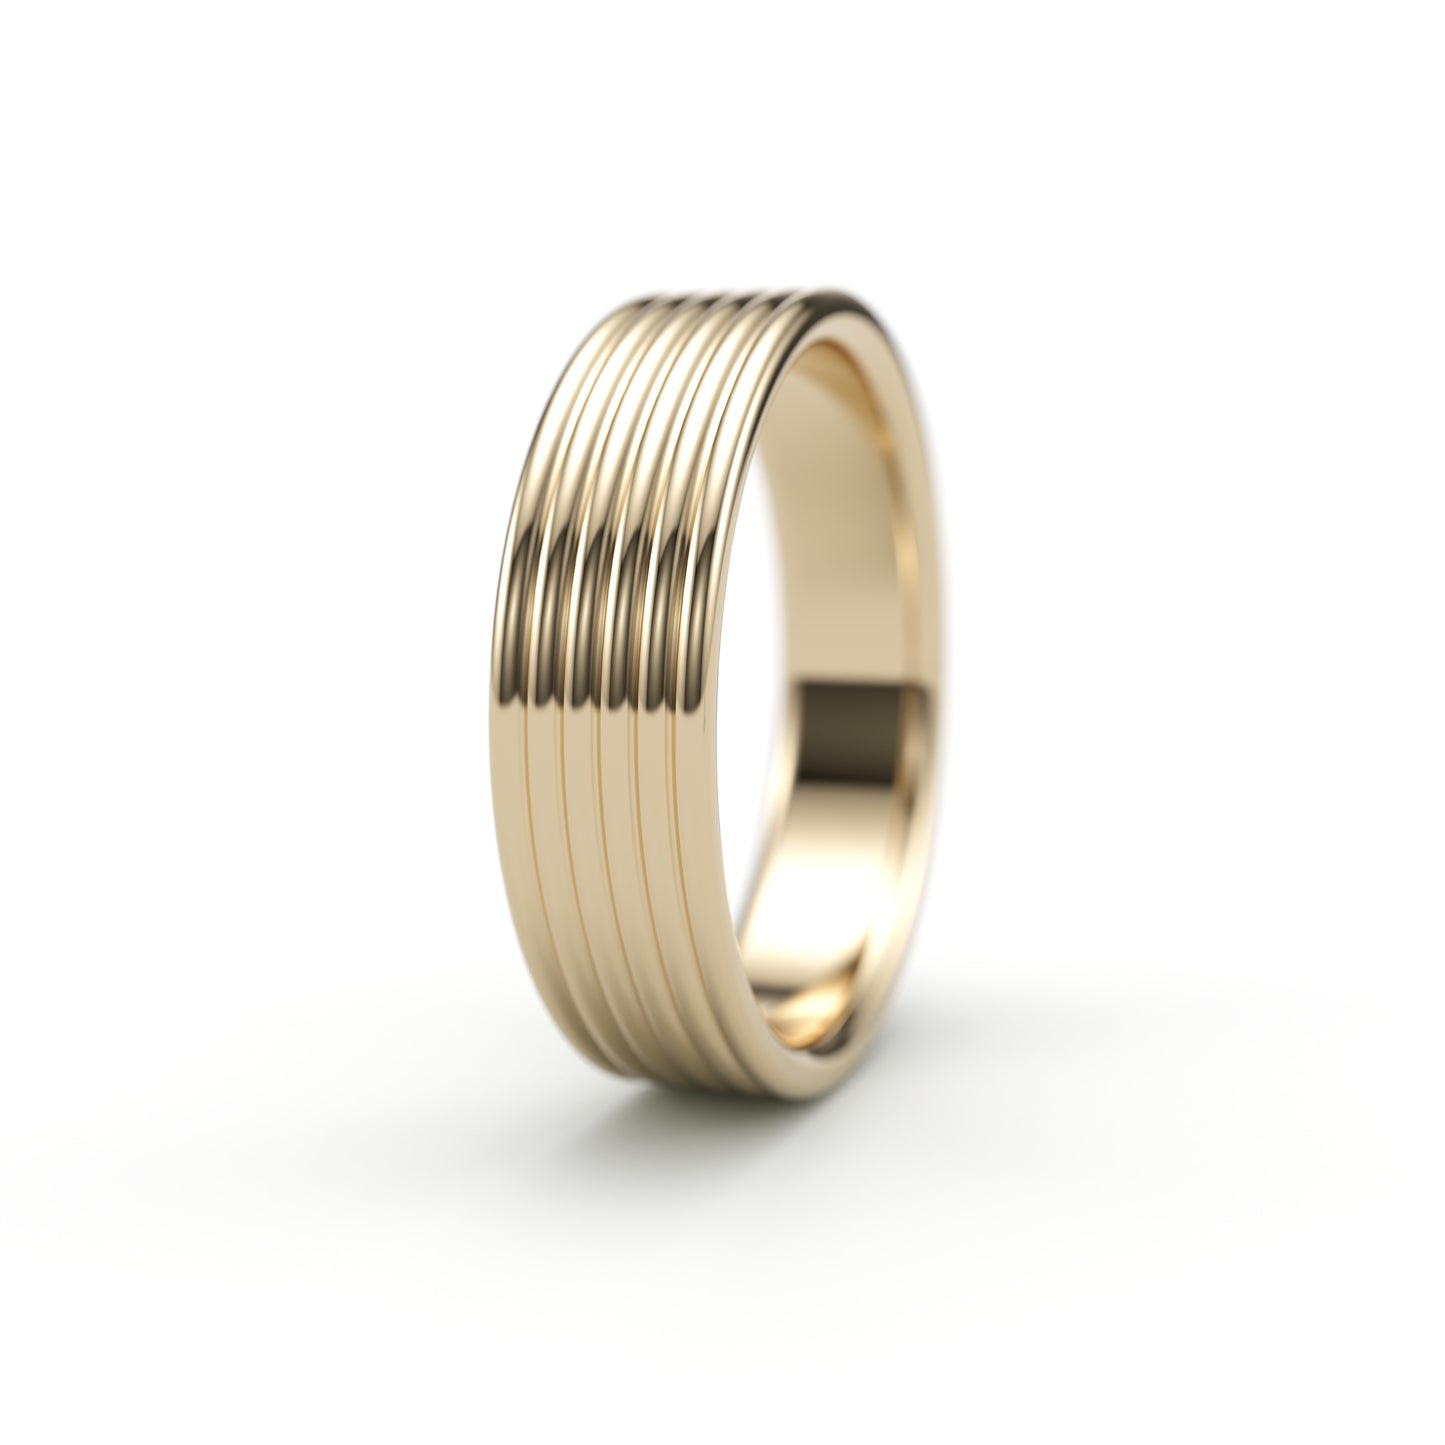 Banded solid gold wedding band. 6mm